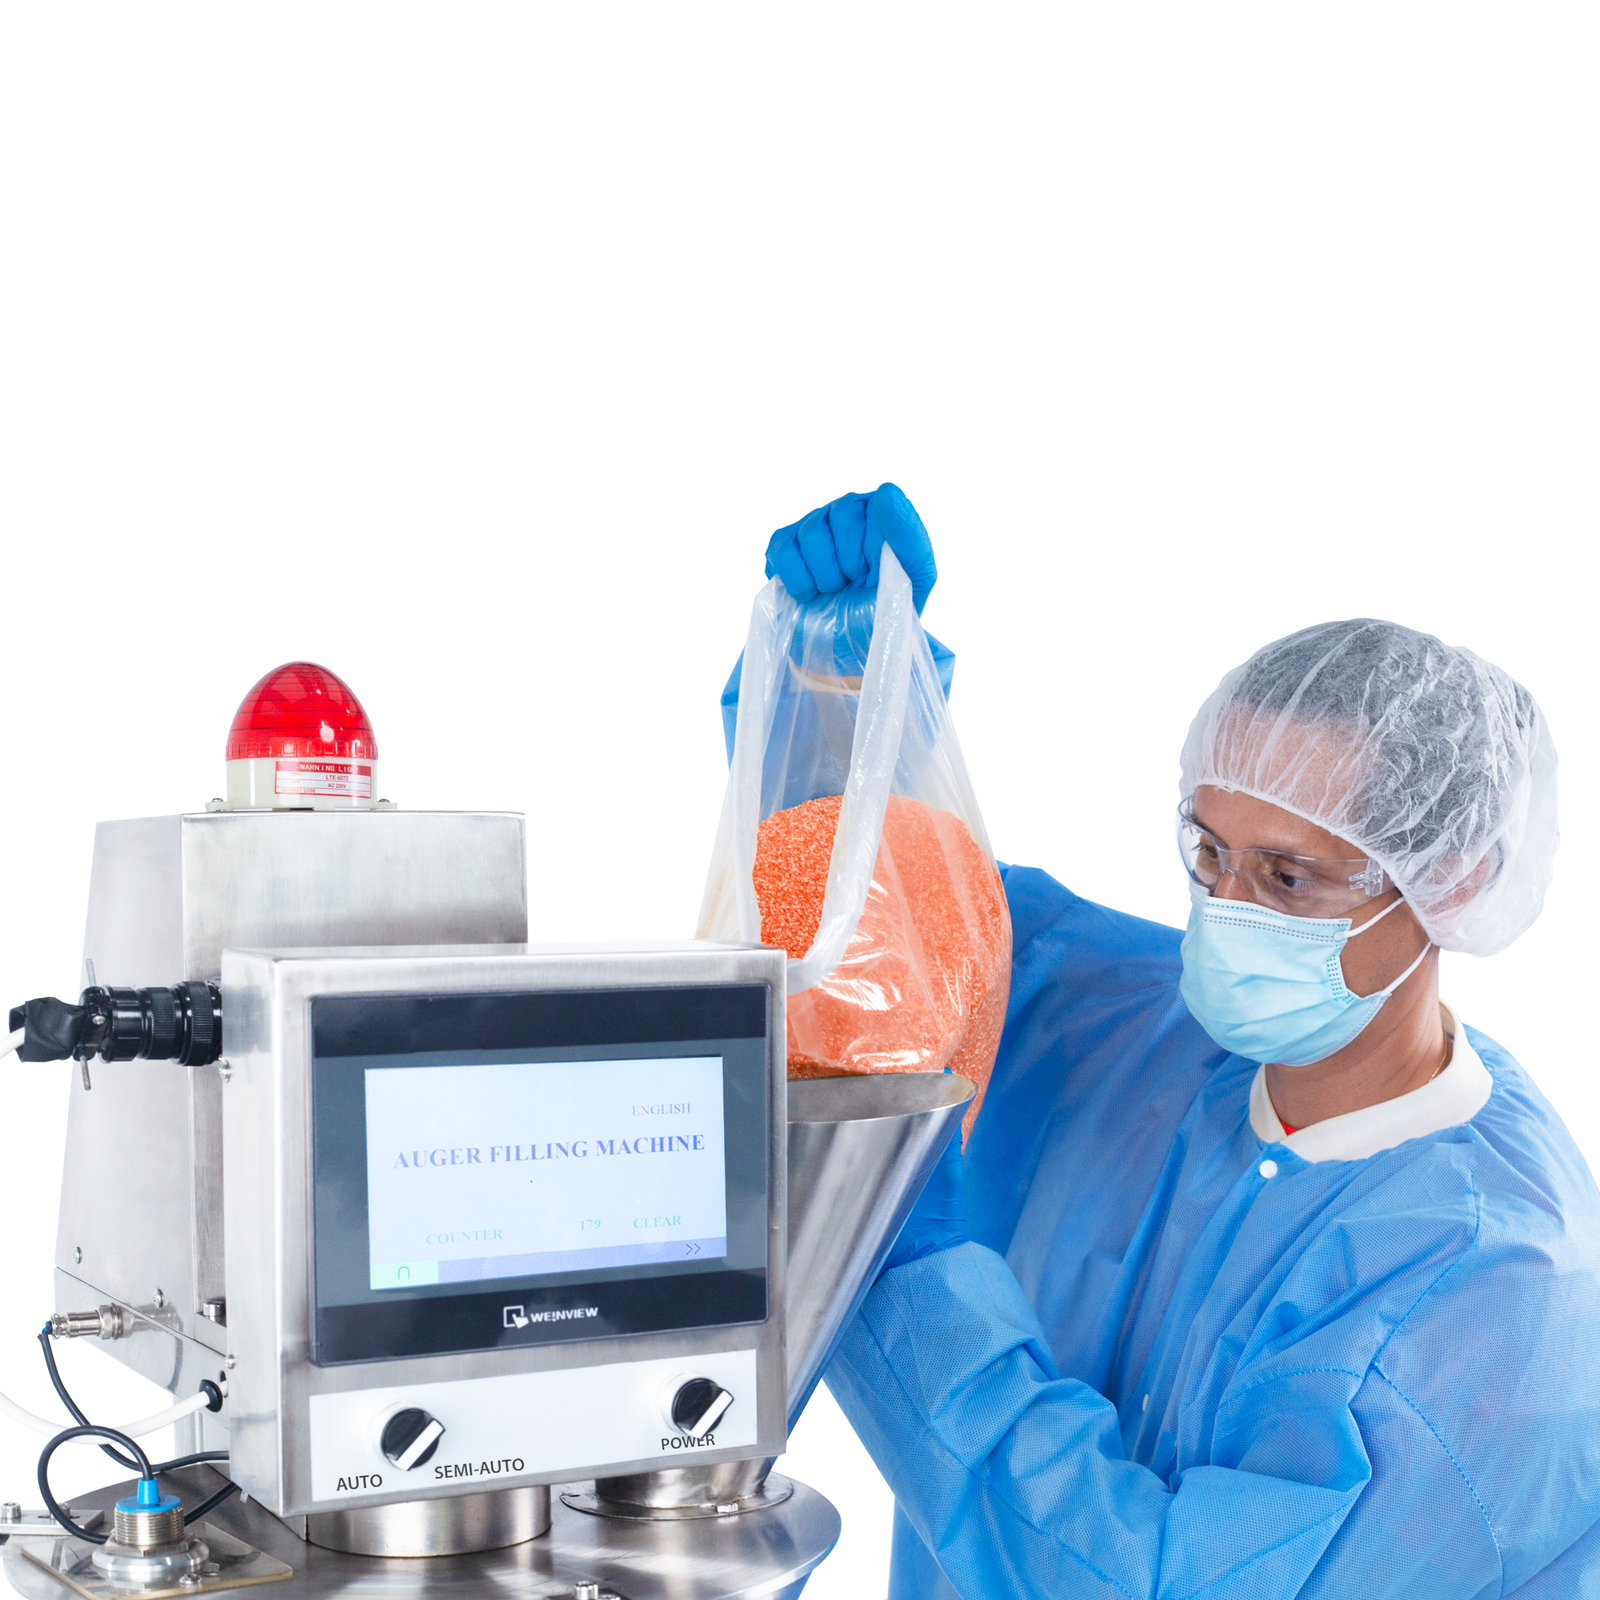 Close-up of a person with blue latex gloves and dressed in PPE holding a clear bag filled with a red seasoning powder. The bag is held over the feeding cone of the Jorestech auger powder filler, which will be used to dispense seasoning powder into containers.